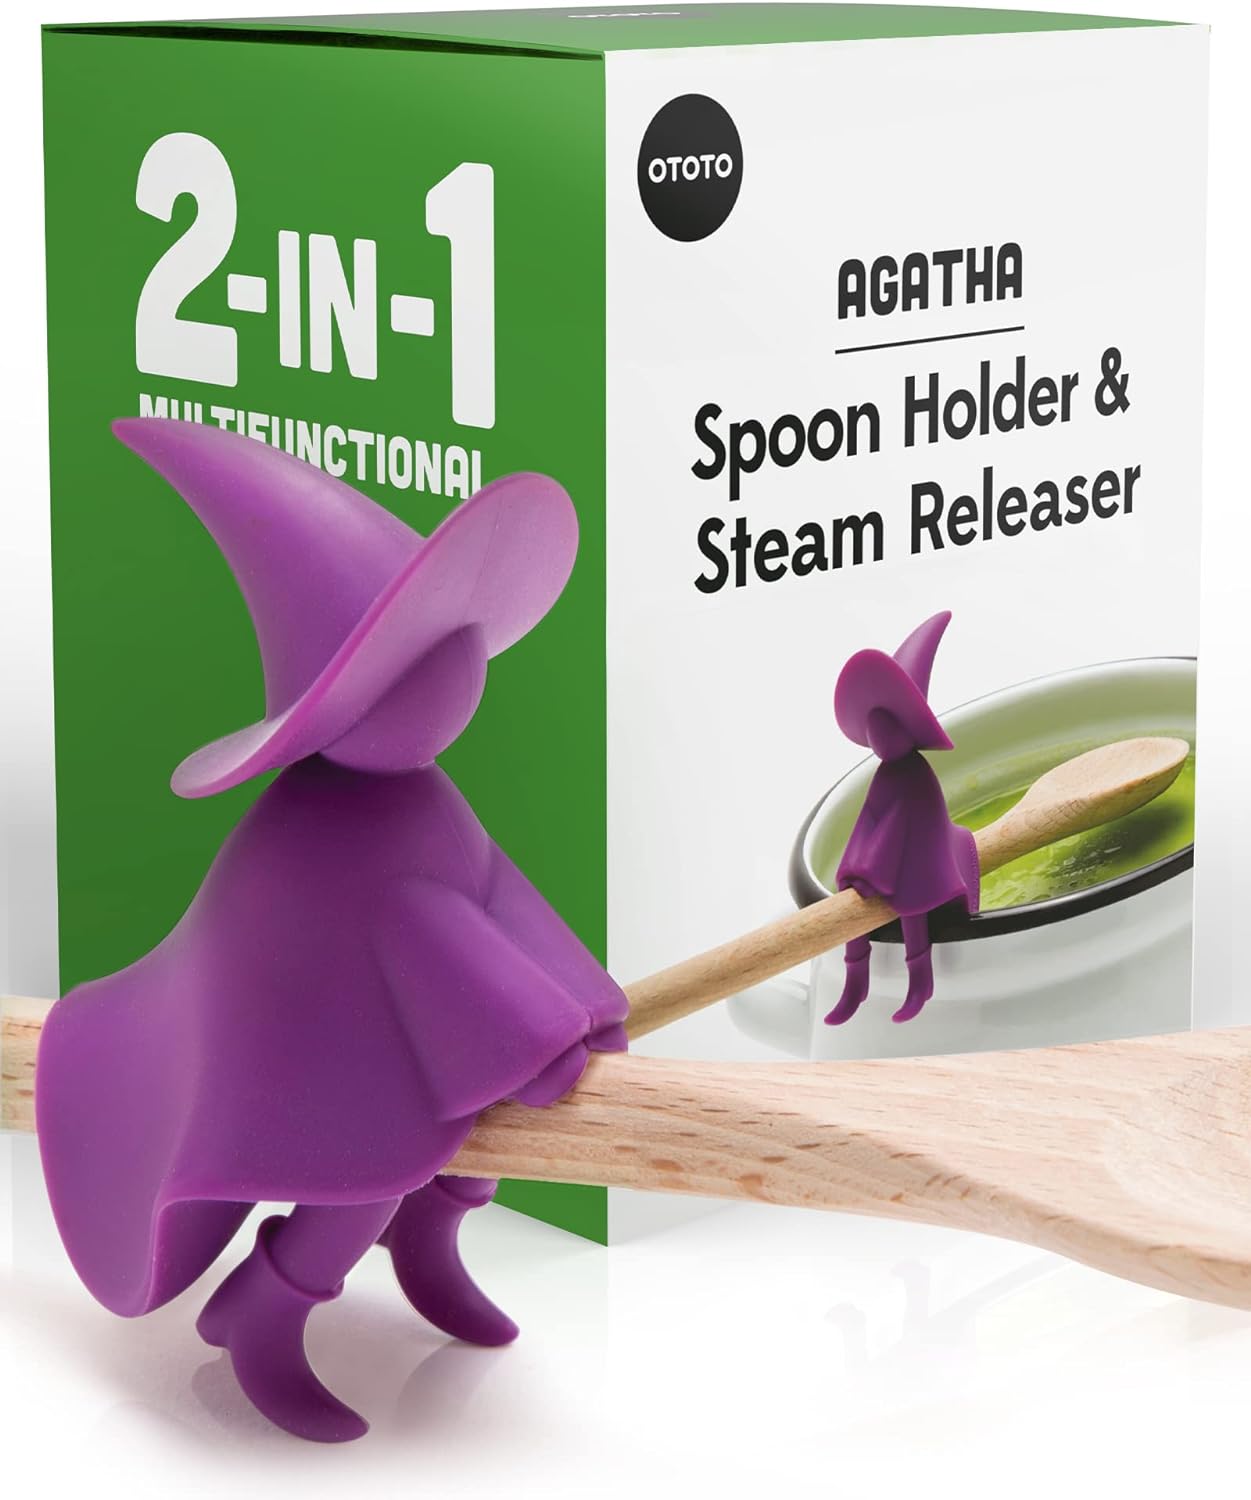 Funny Spoon Holder by OTOTO – Spoon Rest for Stove Top – Cooking Gadgets, Cooking Gifts, Cool Kitchen Gadgets, Cool Gifts, Cute Kitchen Accessories